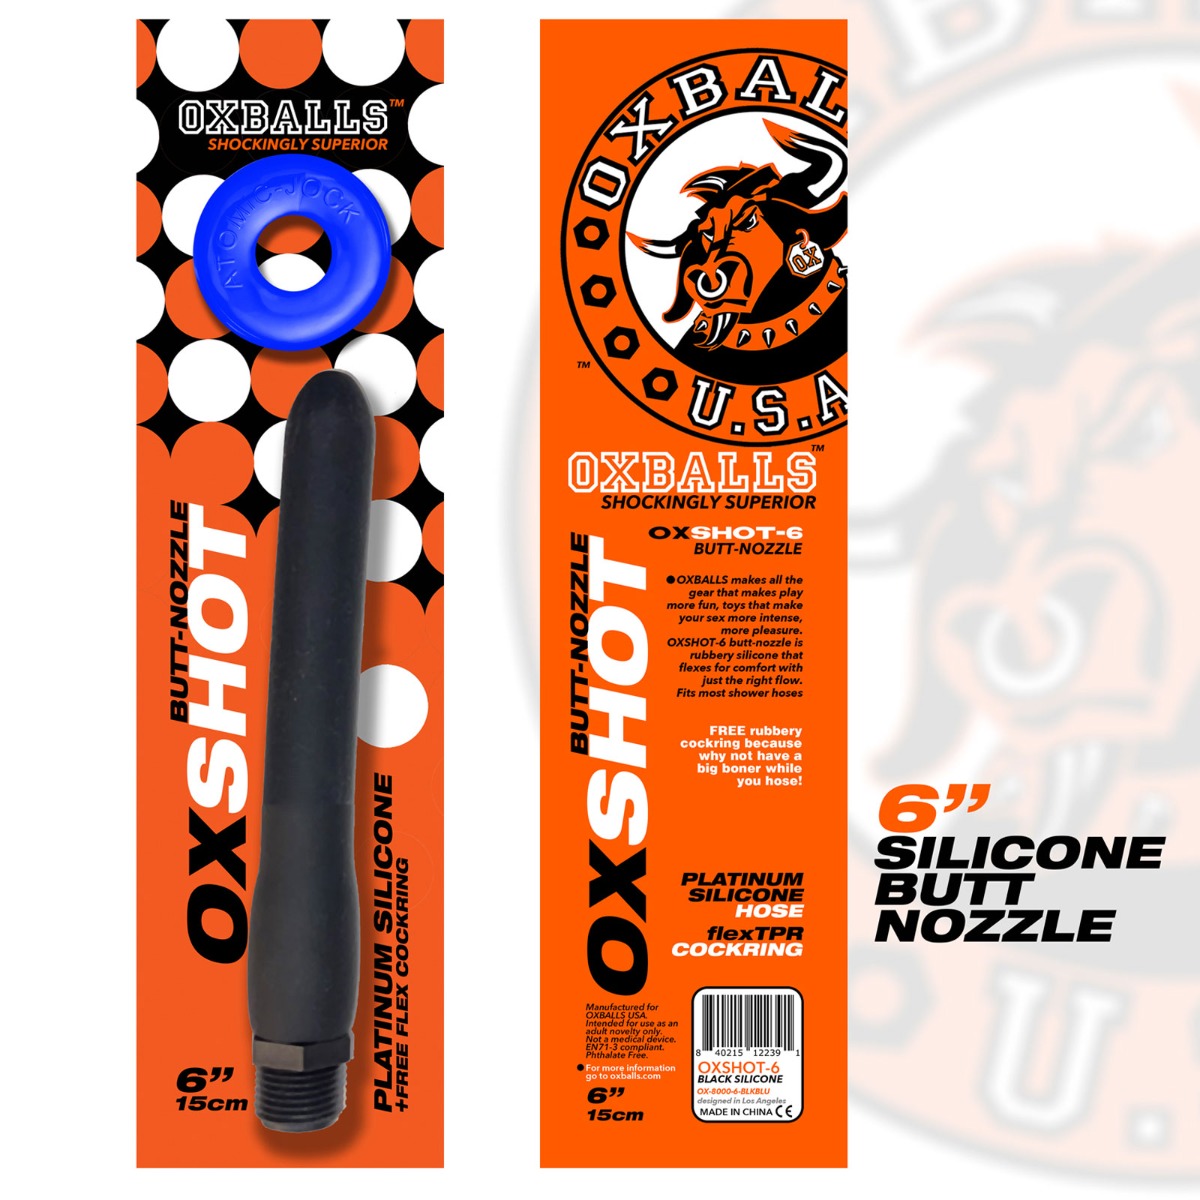 Cock Rings Oxballs Oxshot Butt-Nozzle Shower Hose 6 Inch and Blue Atomic Jock Cockring   